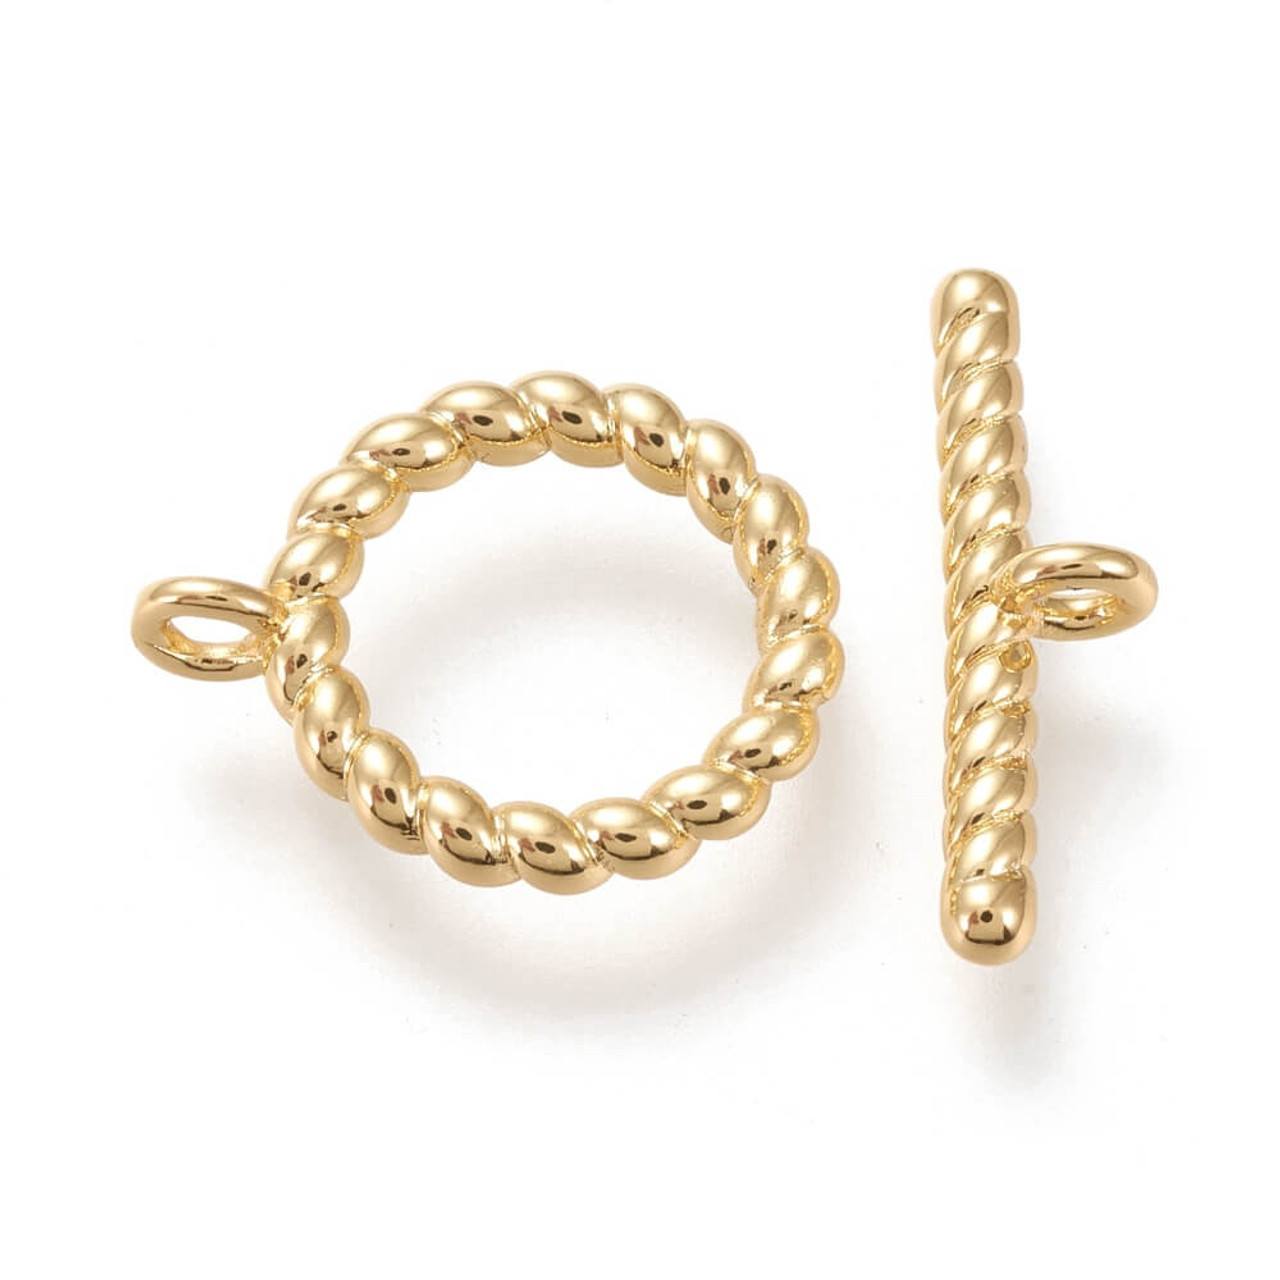 TOGGLE CLASP-Round 15mm -Gold Plated